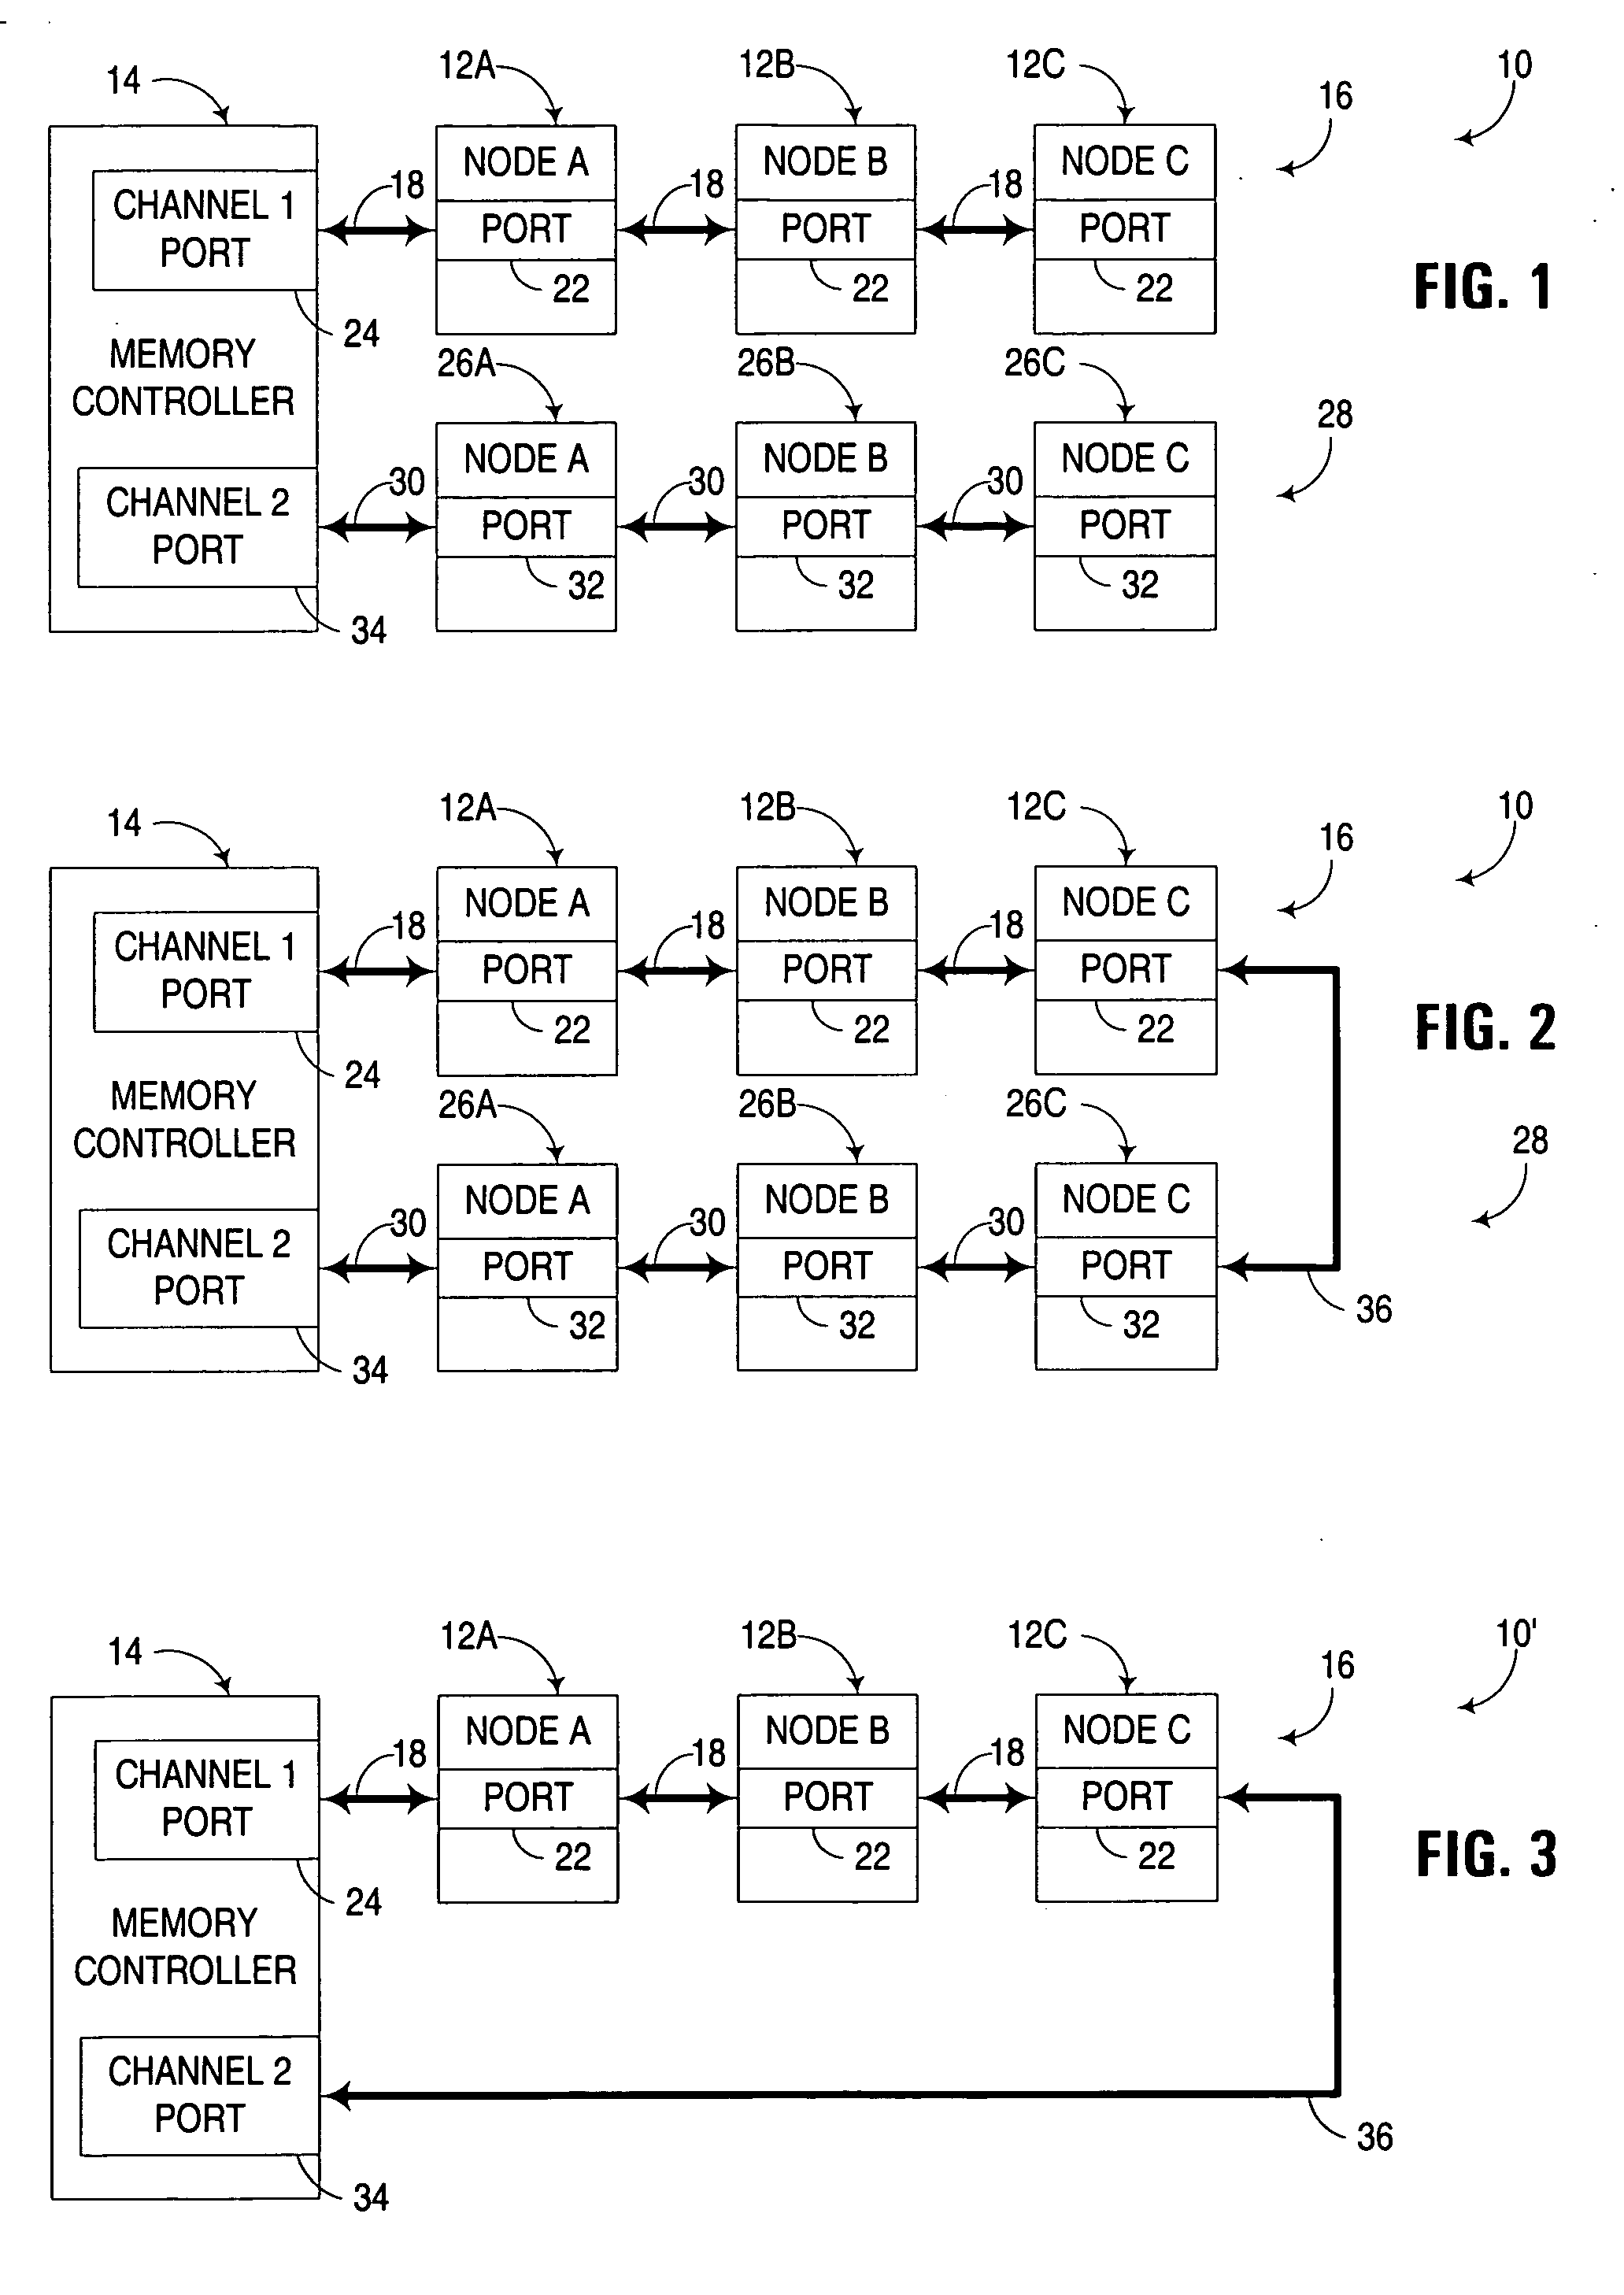 Multi-channel memory architecture for daisy chained arrangements of nodes with bridging between memory channels